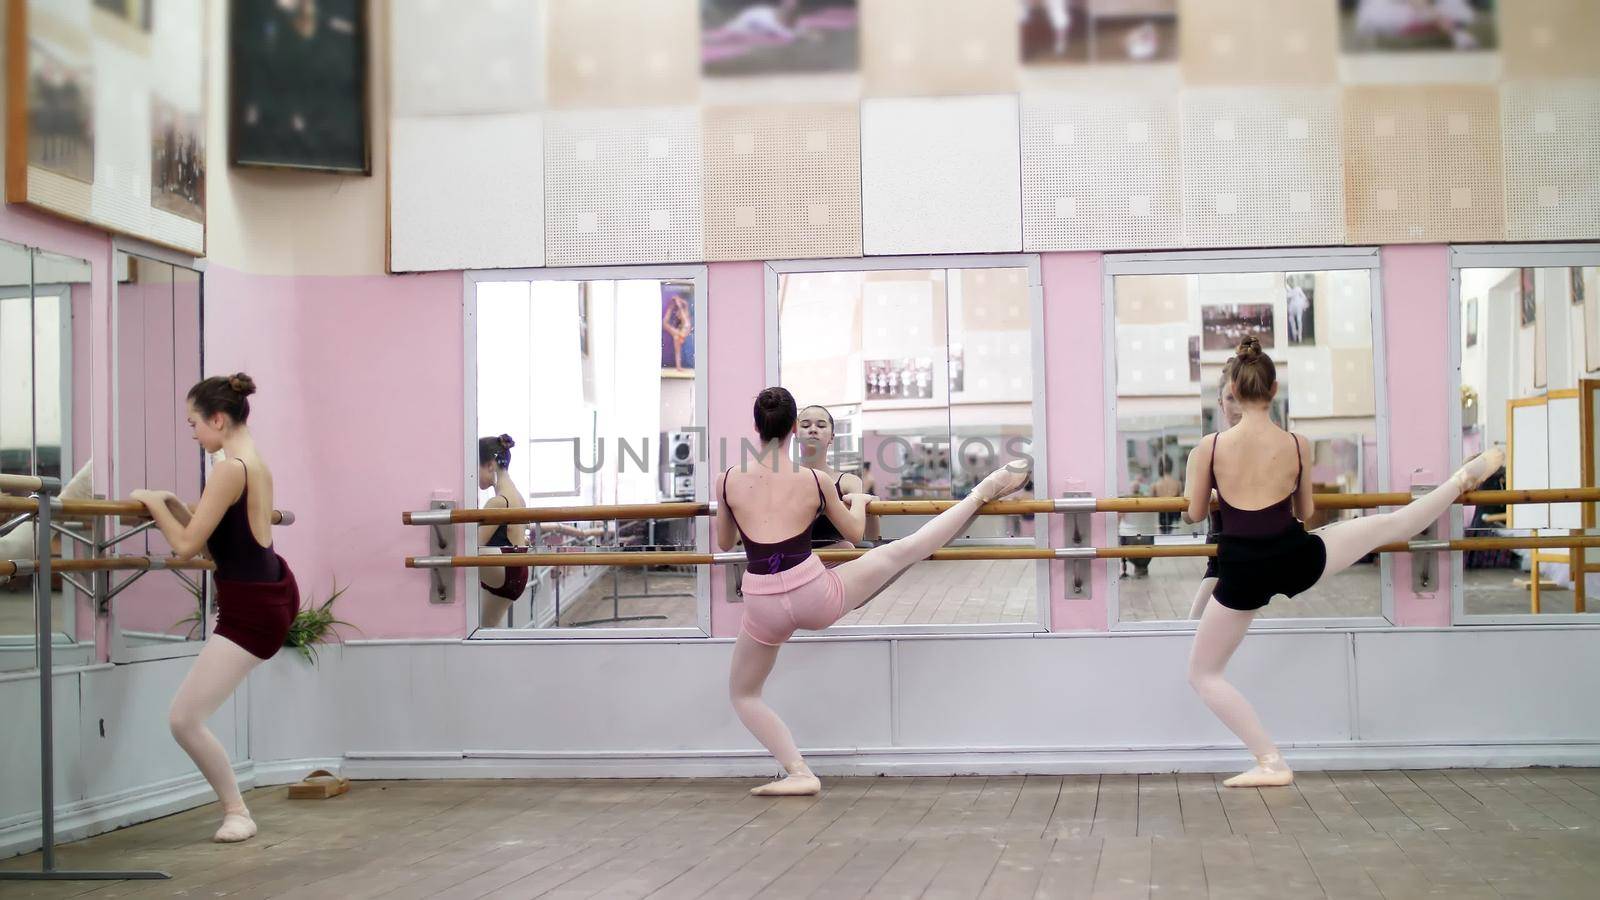 in dancing hall, Young ballerinas in black leotards stretching at barre, on pointe shoes, elegantly, standing near barre at mirror in ballet class. High quality photo